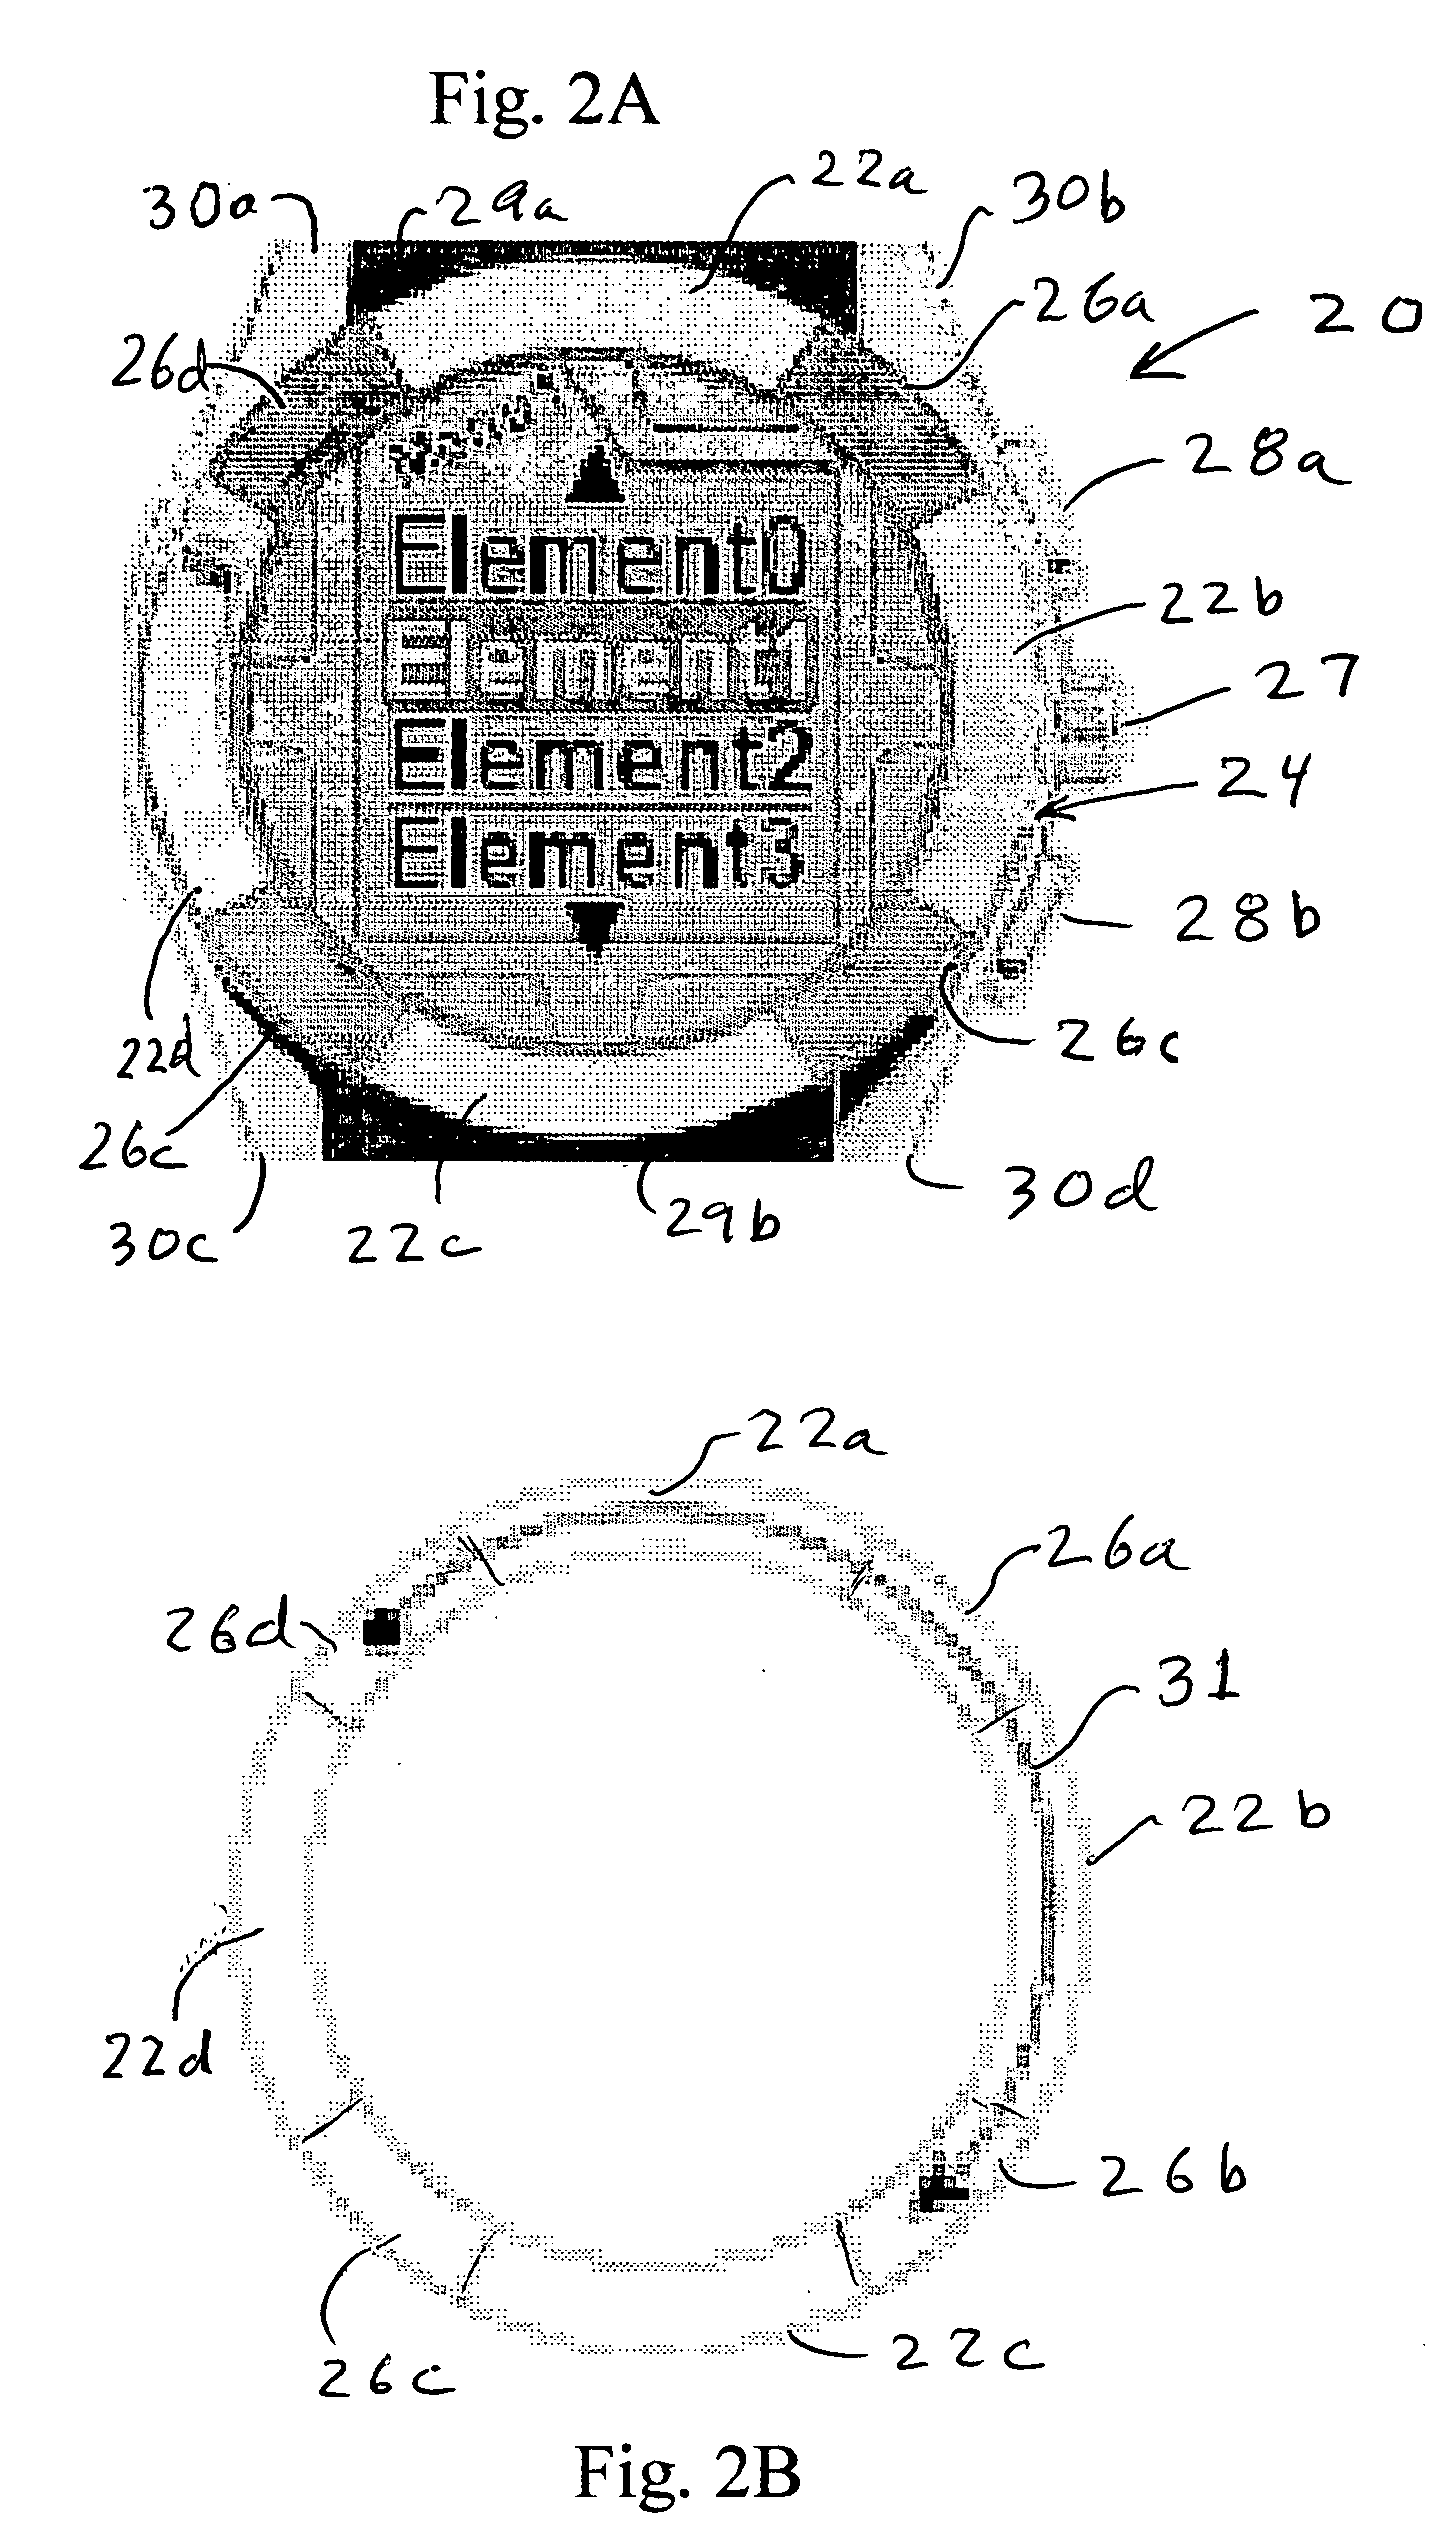 Input method and apparatus using tactile guidance and bi-directional segmented stroke